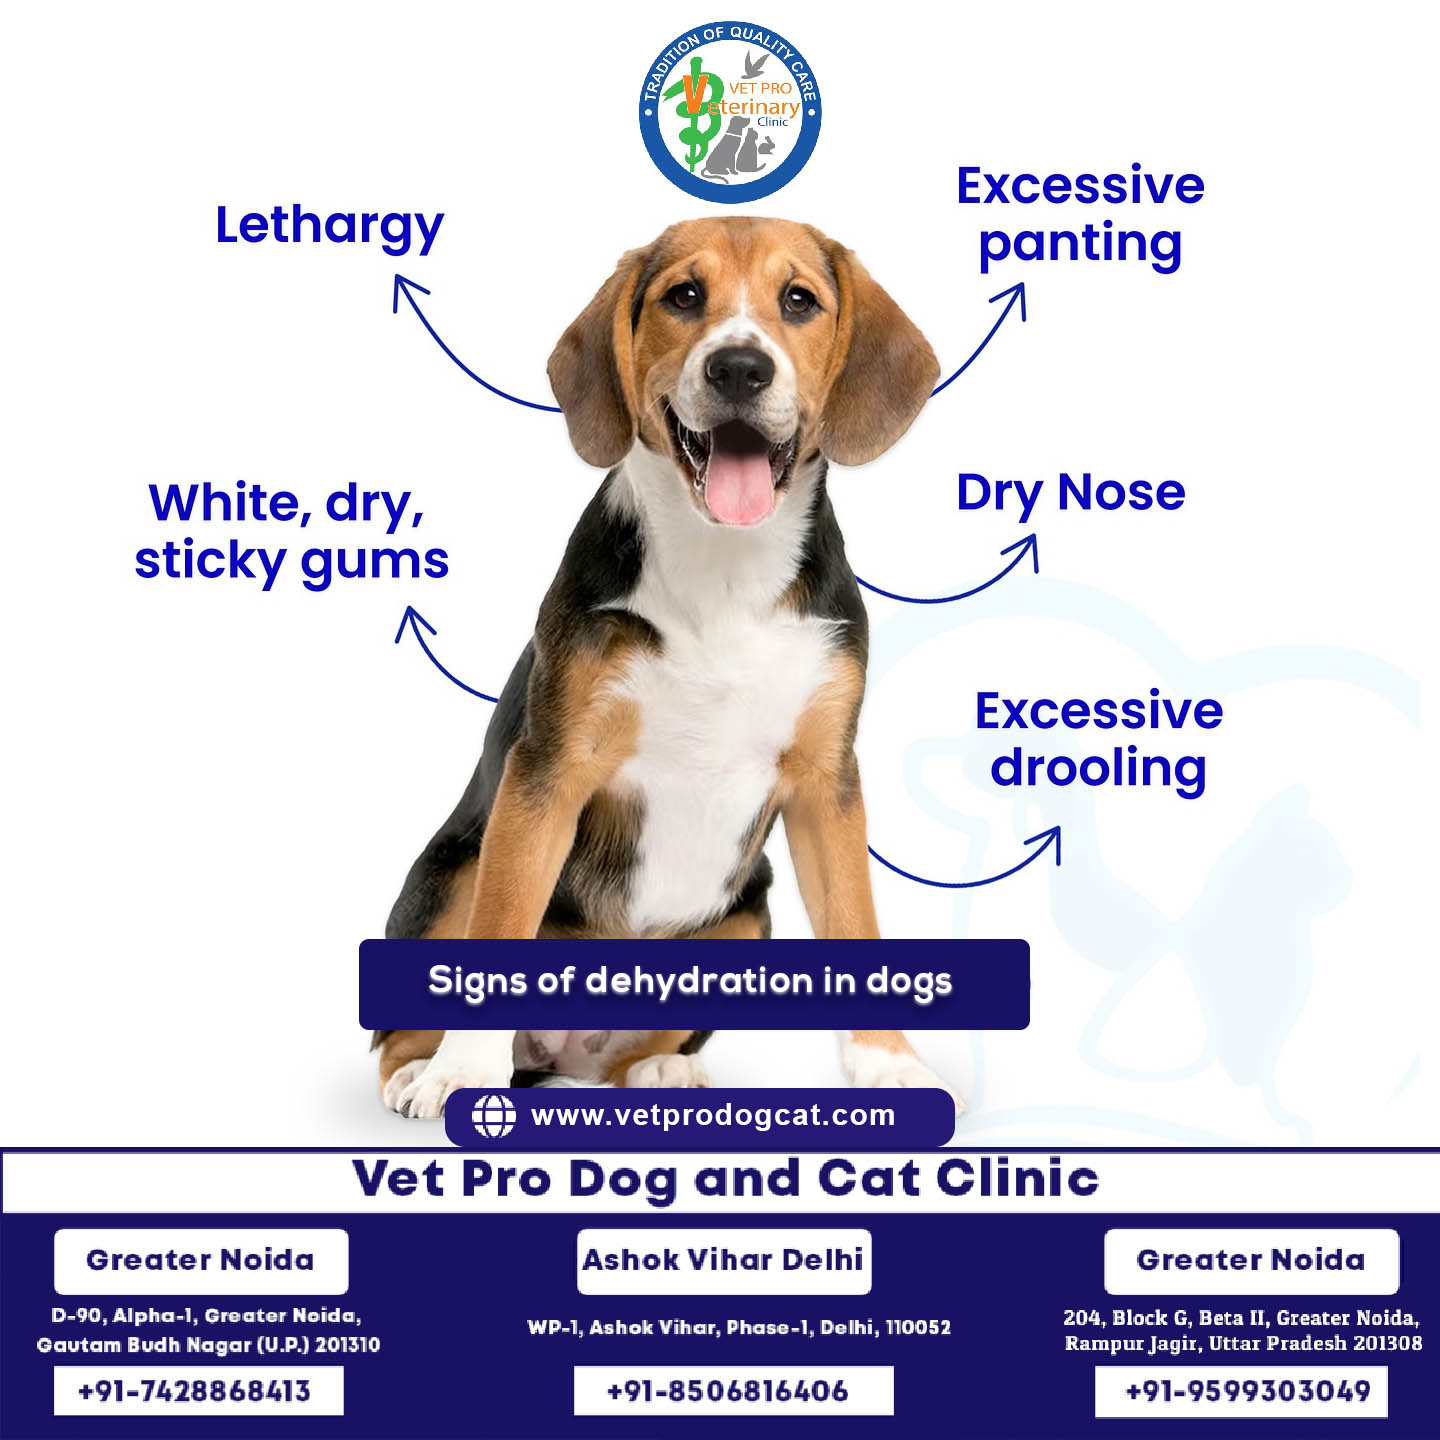 Signs of dehydration in dogs